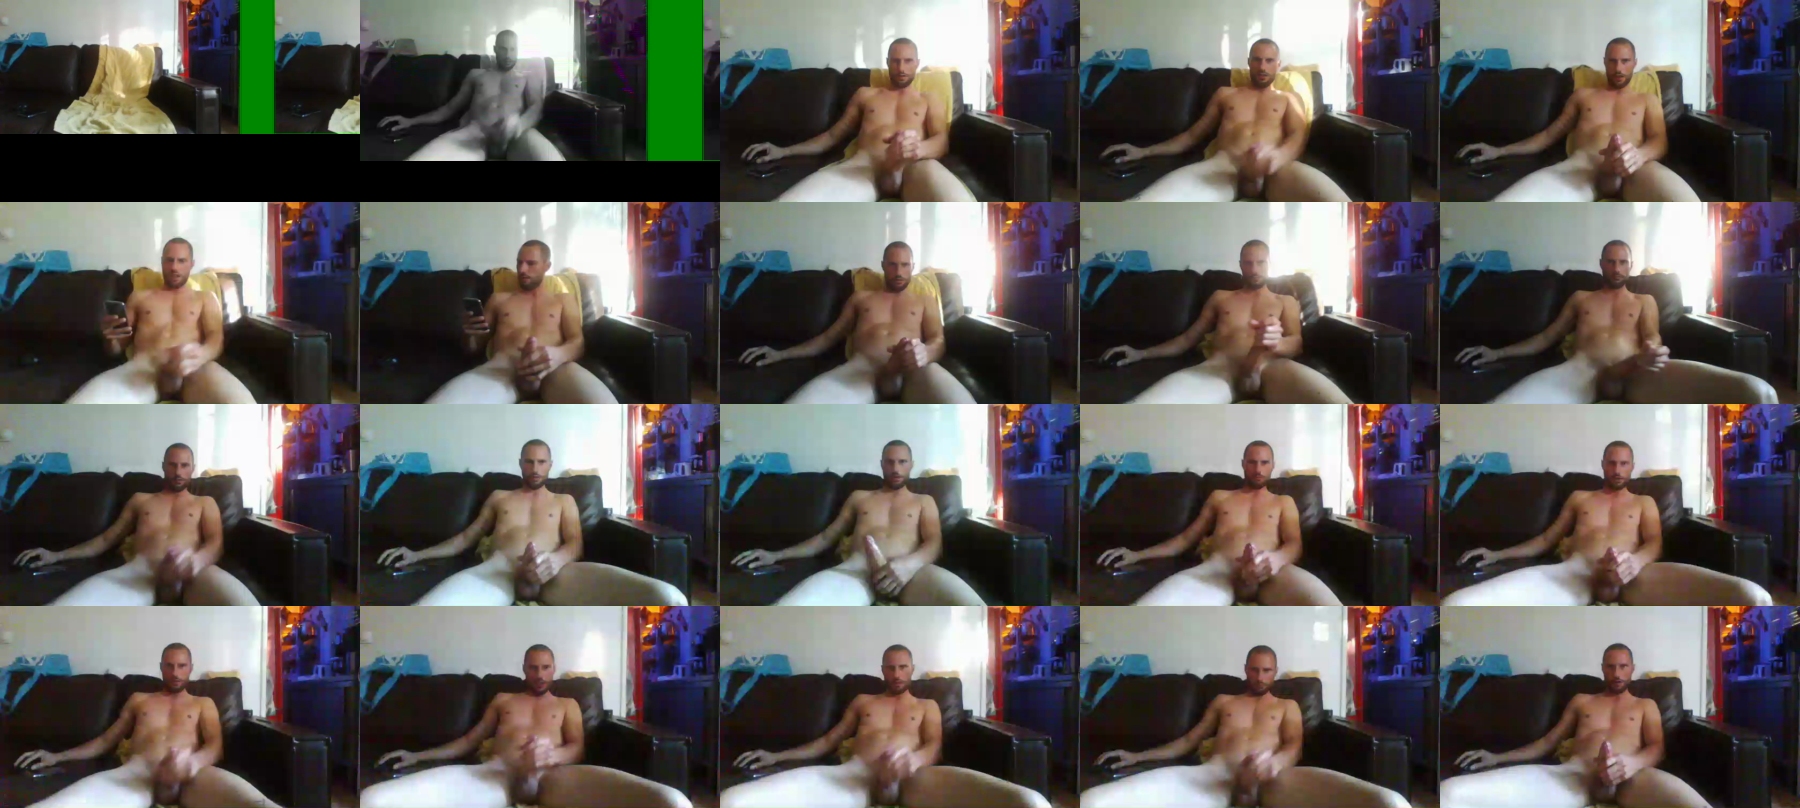 couchguy1984  29-09-2021 Recorded Video Webcam